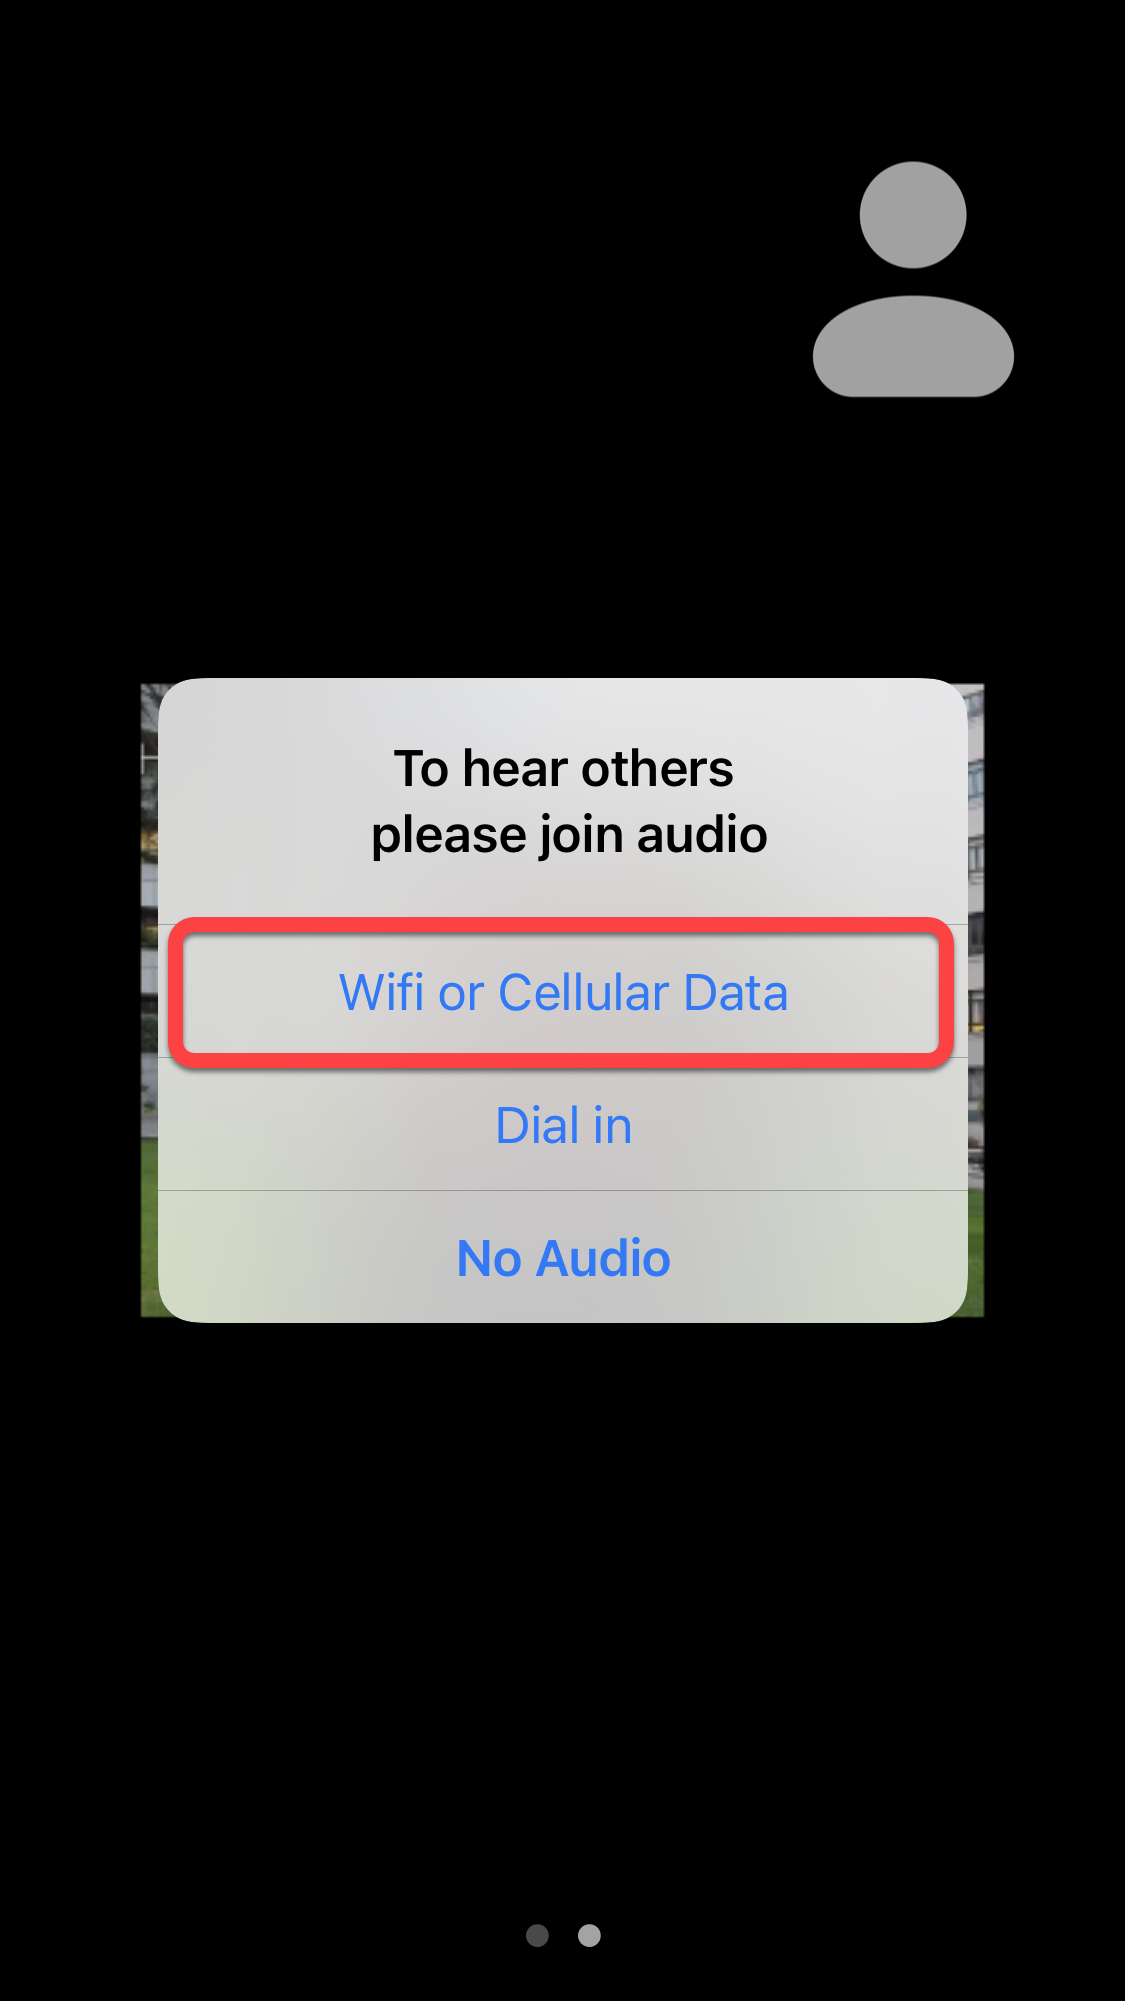 Wifi or Cellular Data outlined in red